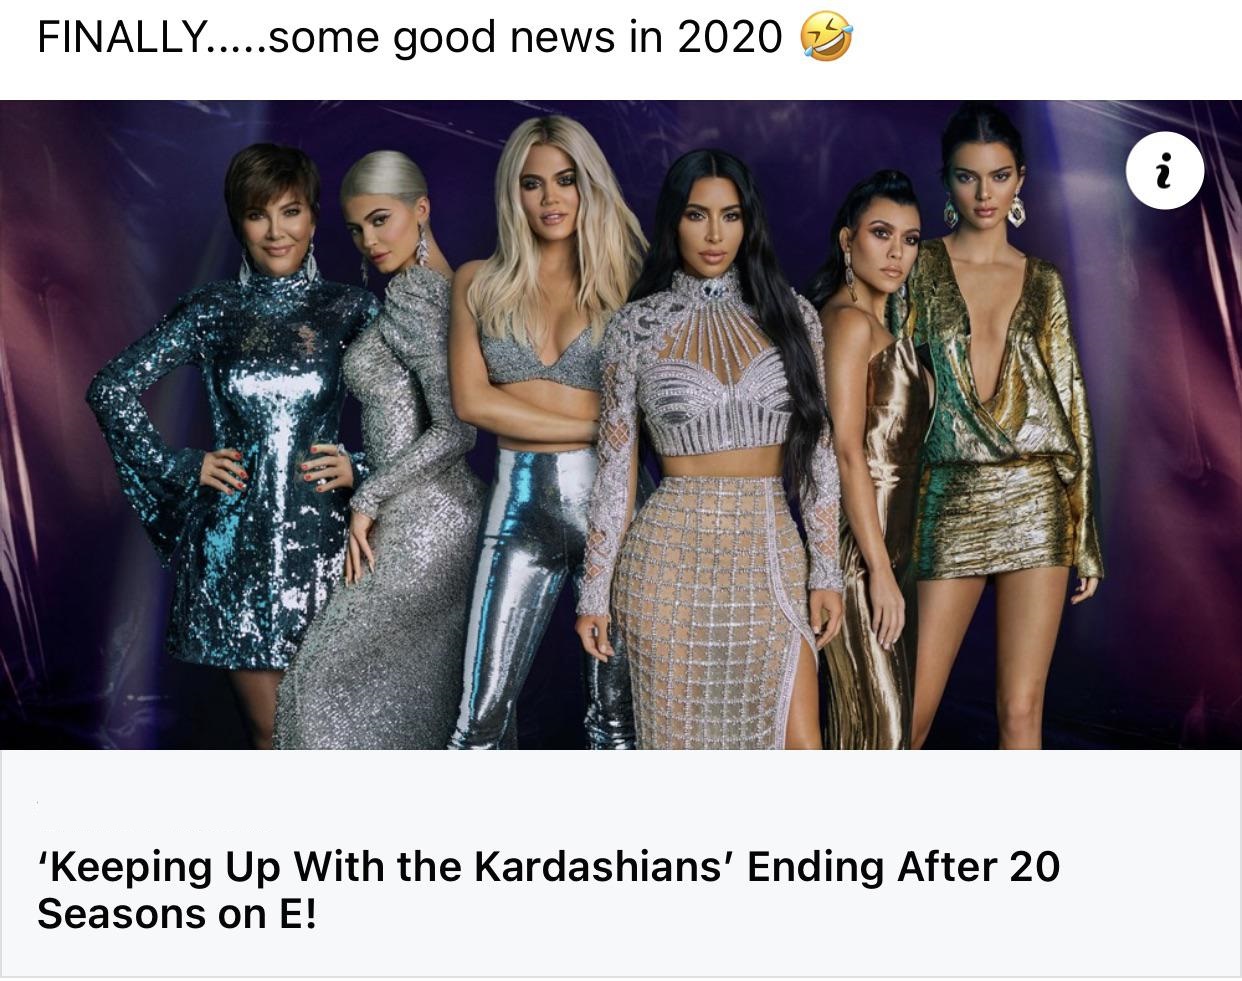 funny memes and random pics - kardashian jenner family - Finally.....some good news in 2020 . 'Keeping Up With the Kardashians' Ending After 20 Seasons on E!